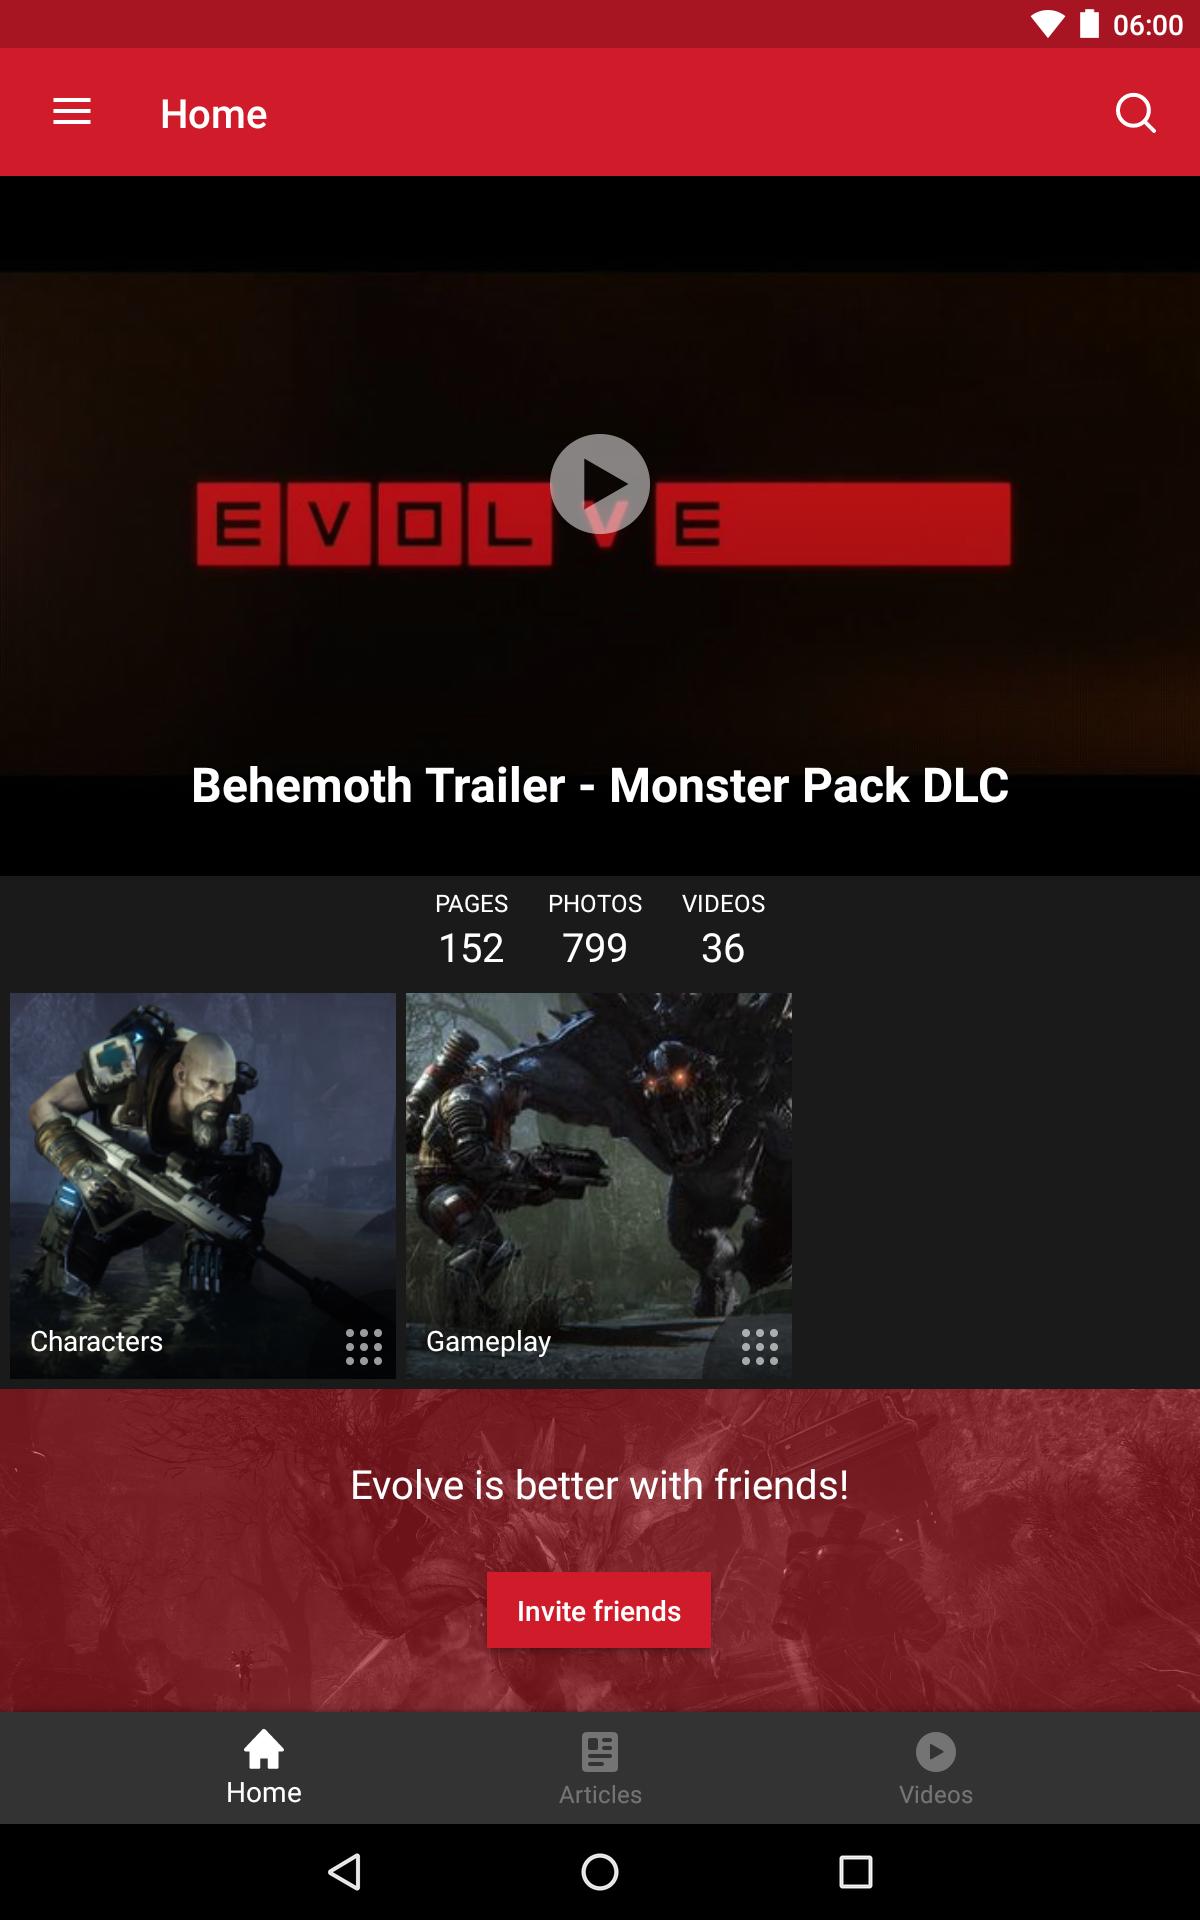 Fandom For Evolve For Android Apk Download - speed run 4 roblox wikia fandom powered by wikia